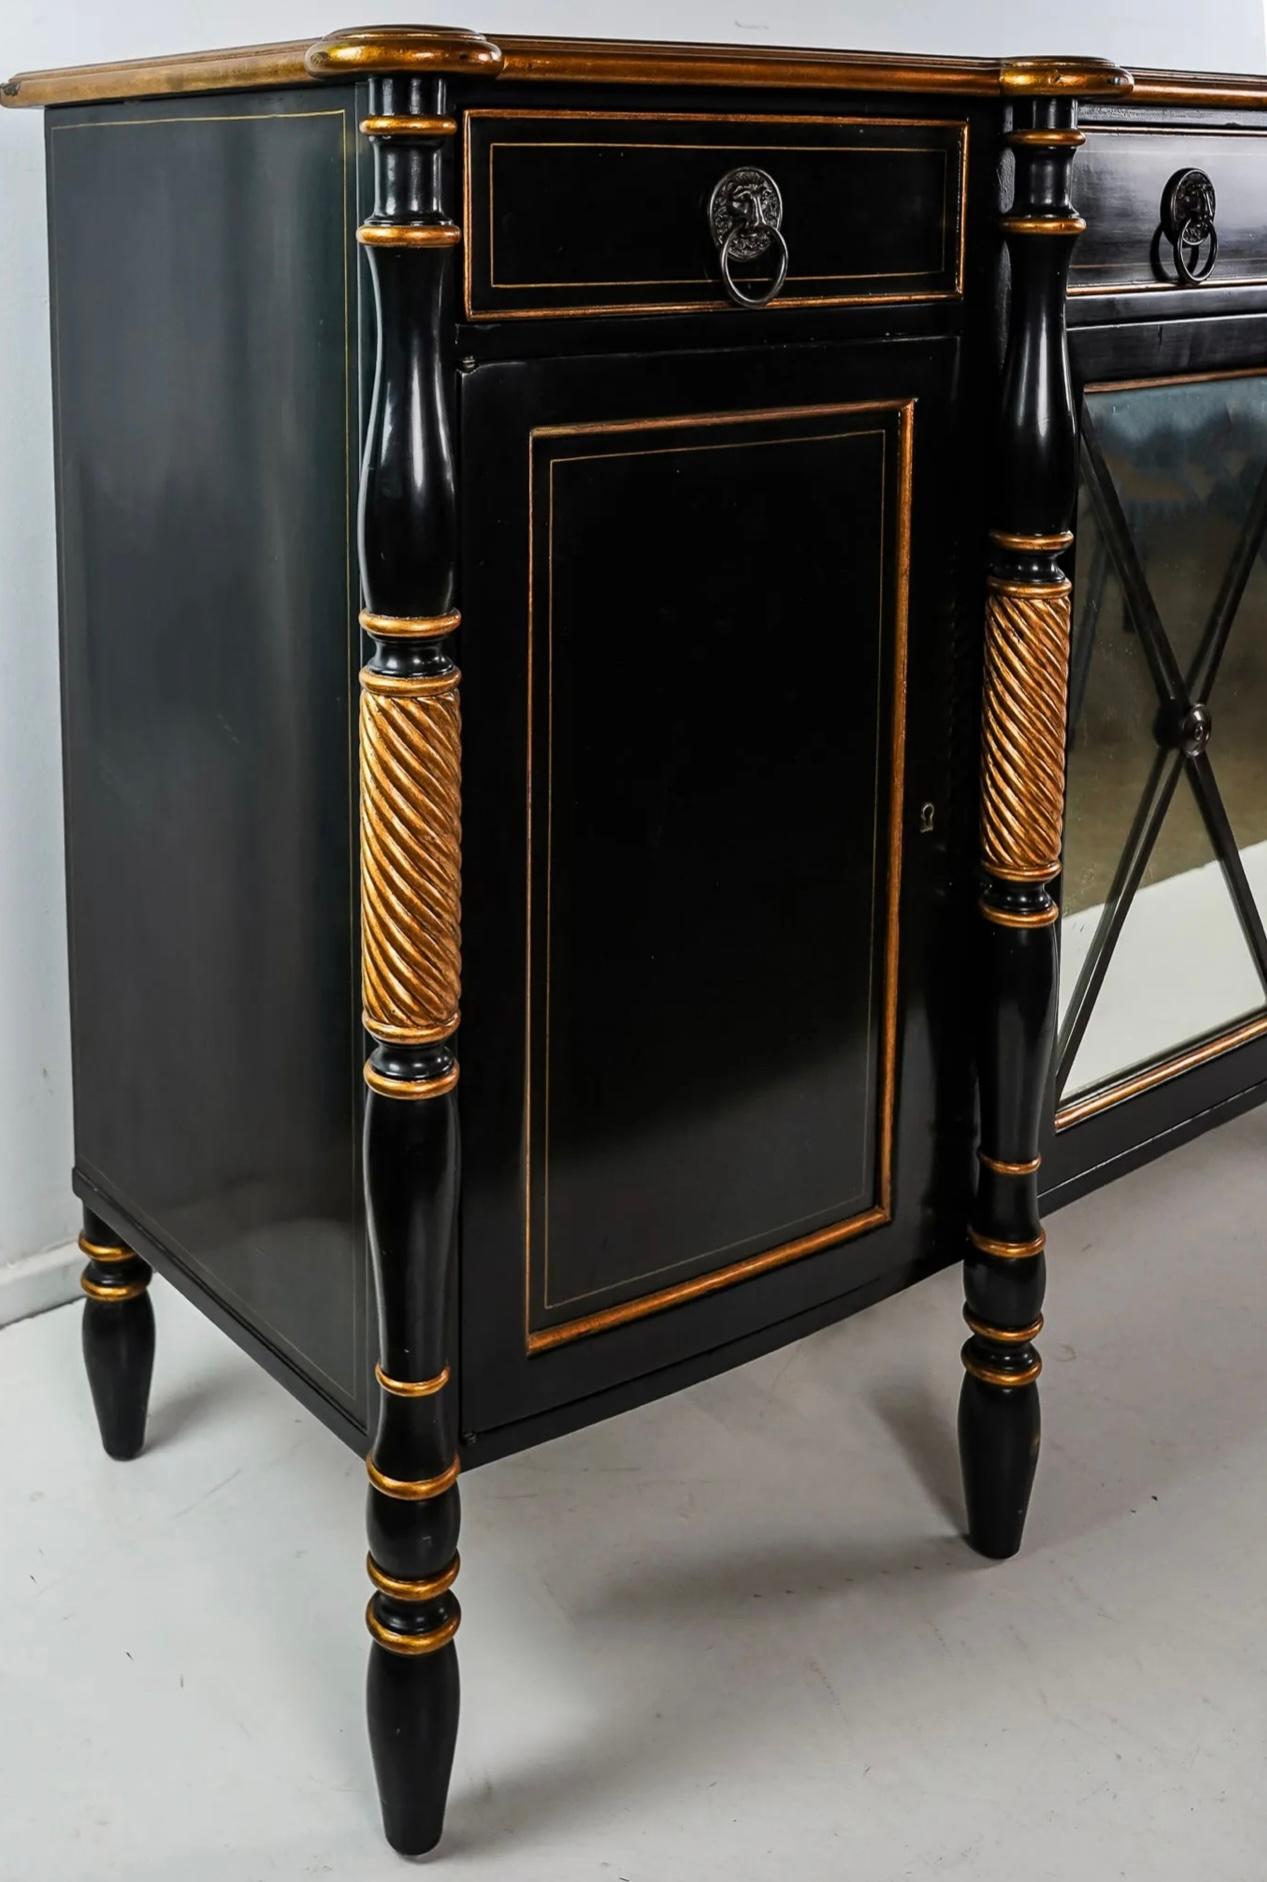 20th Century Regency Style Ebonized Sideboard / Credenza / Server By Hickory White  For Sale